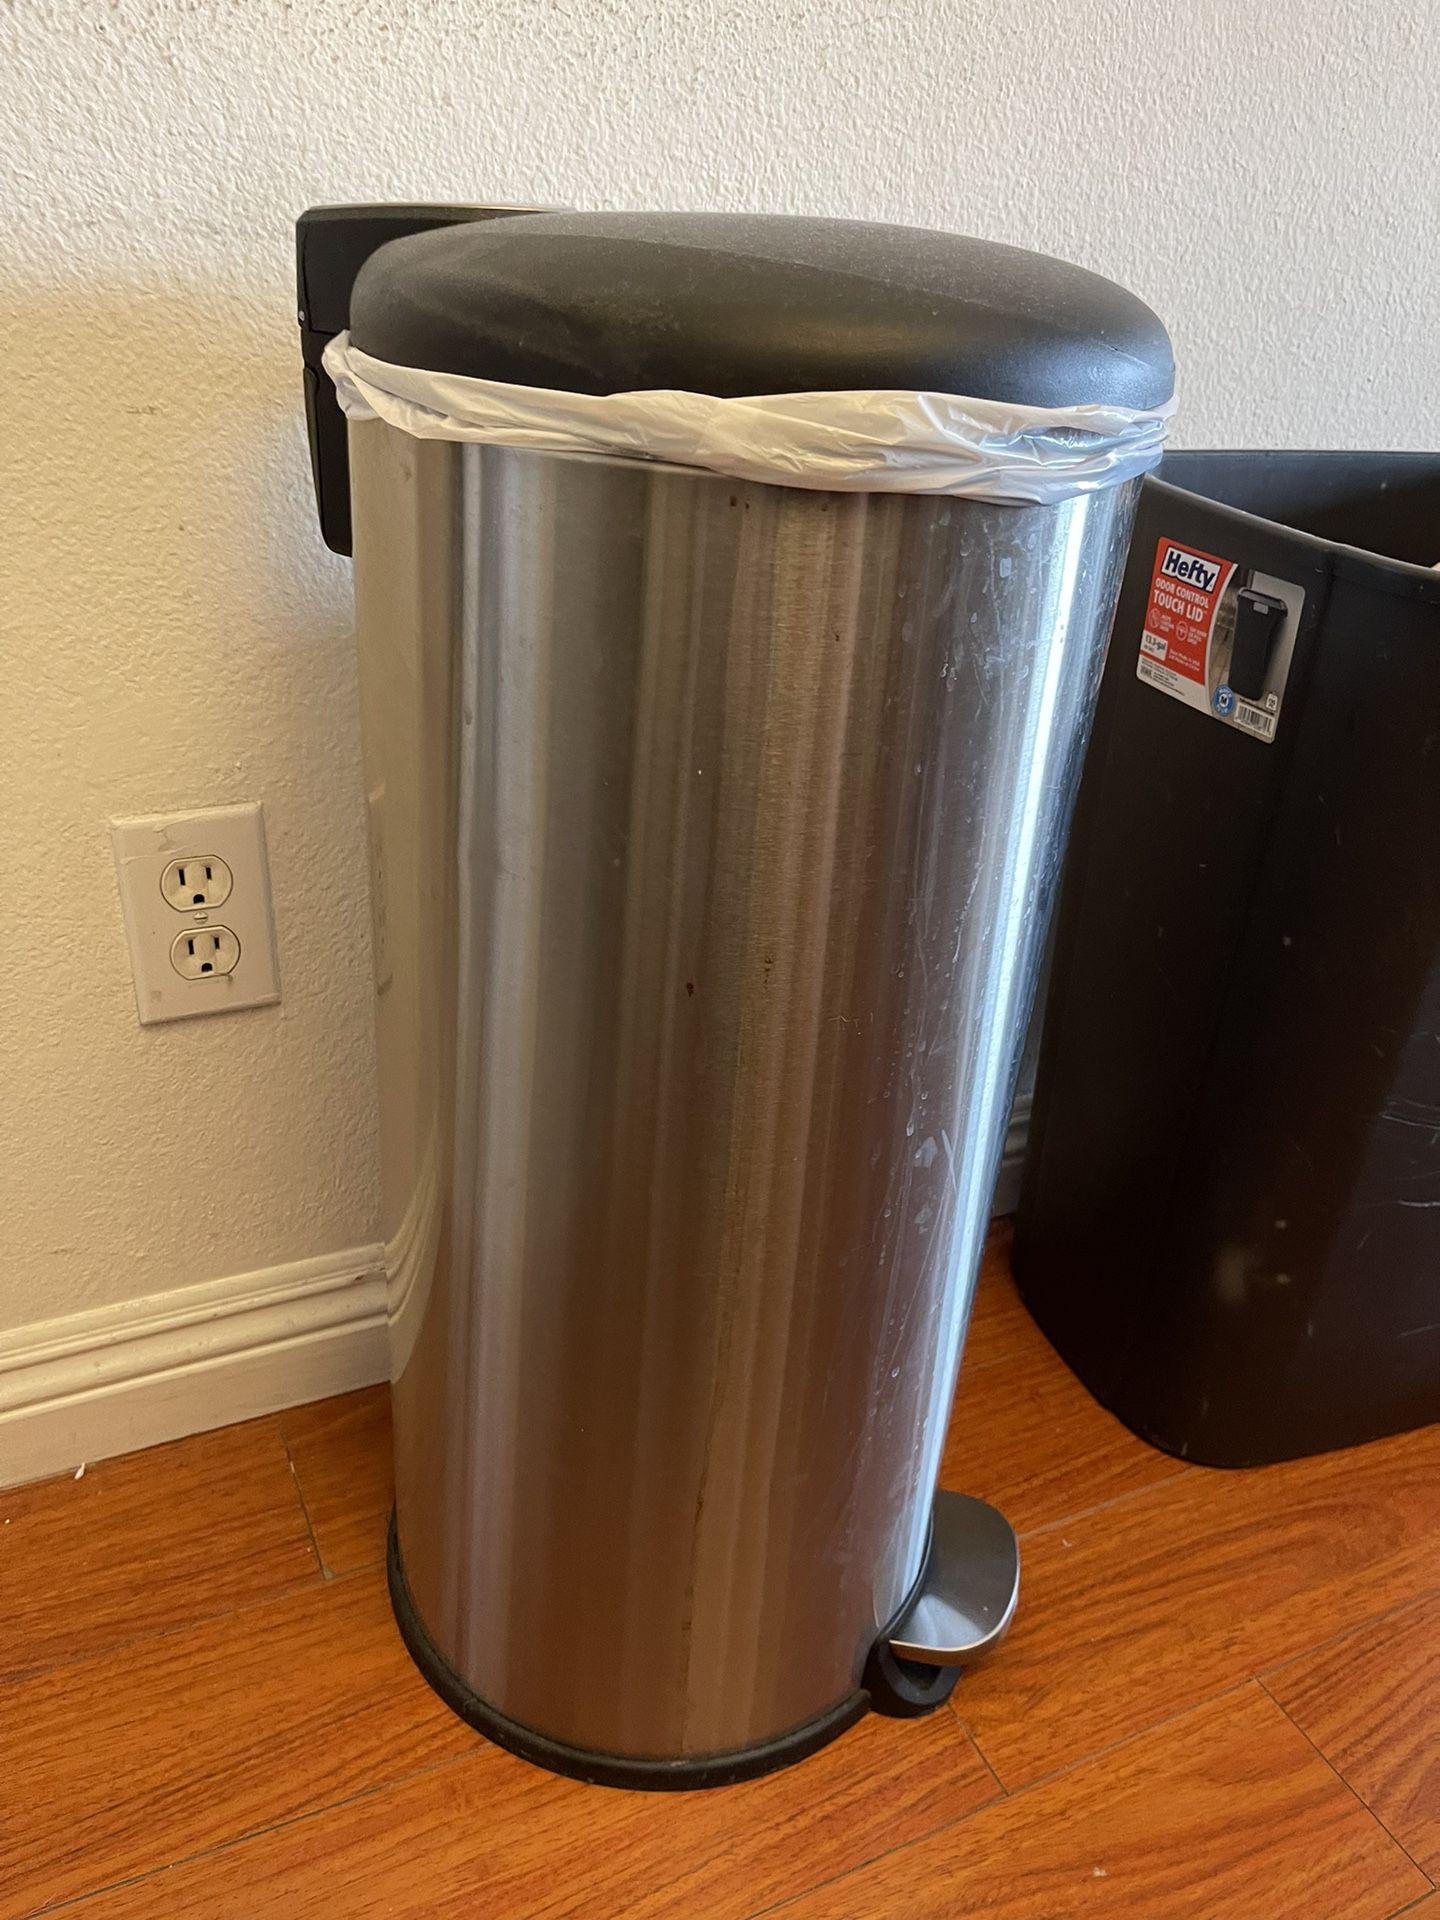 Tall kitchen trashcan - Stainless Steel, Foot Pedal Lid - Clean